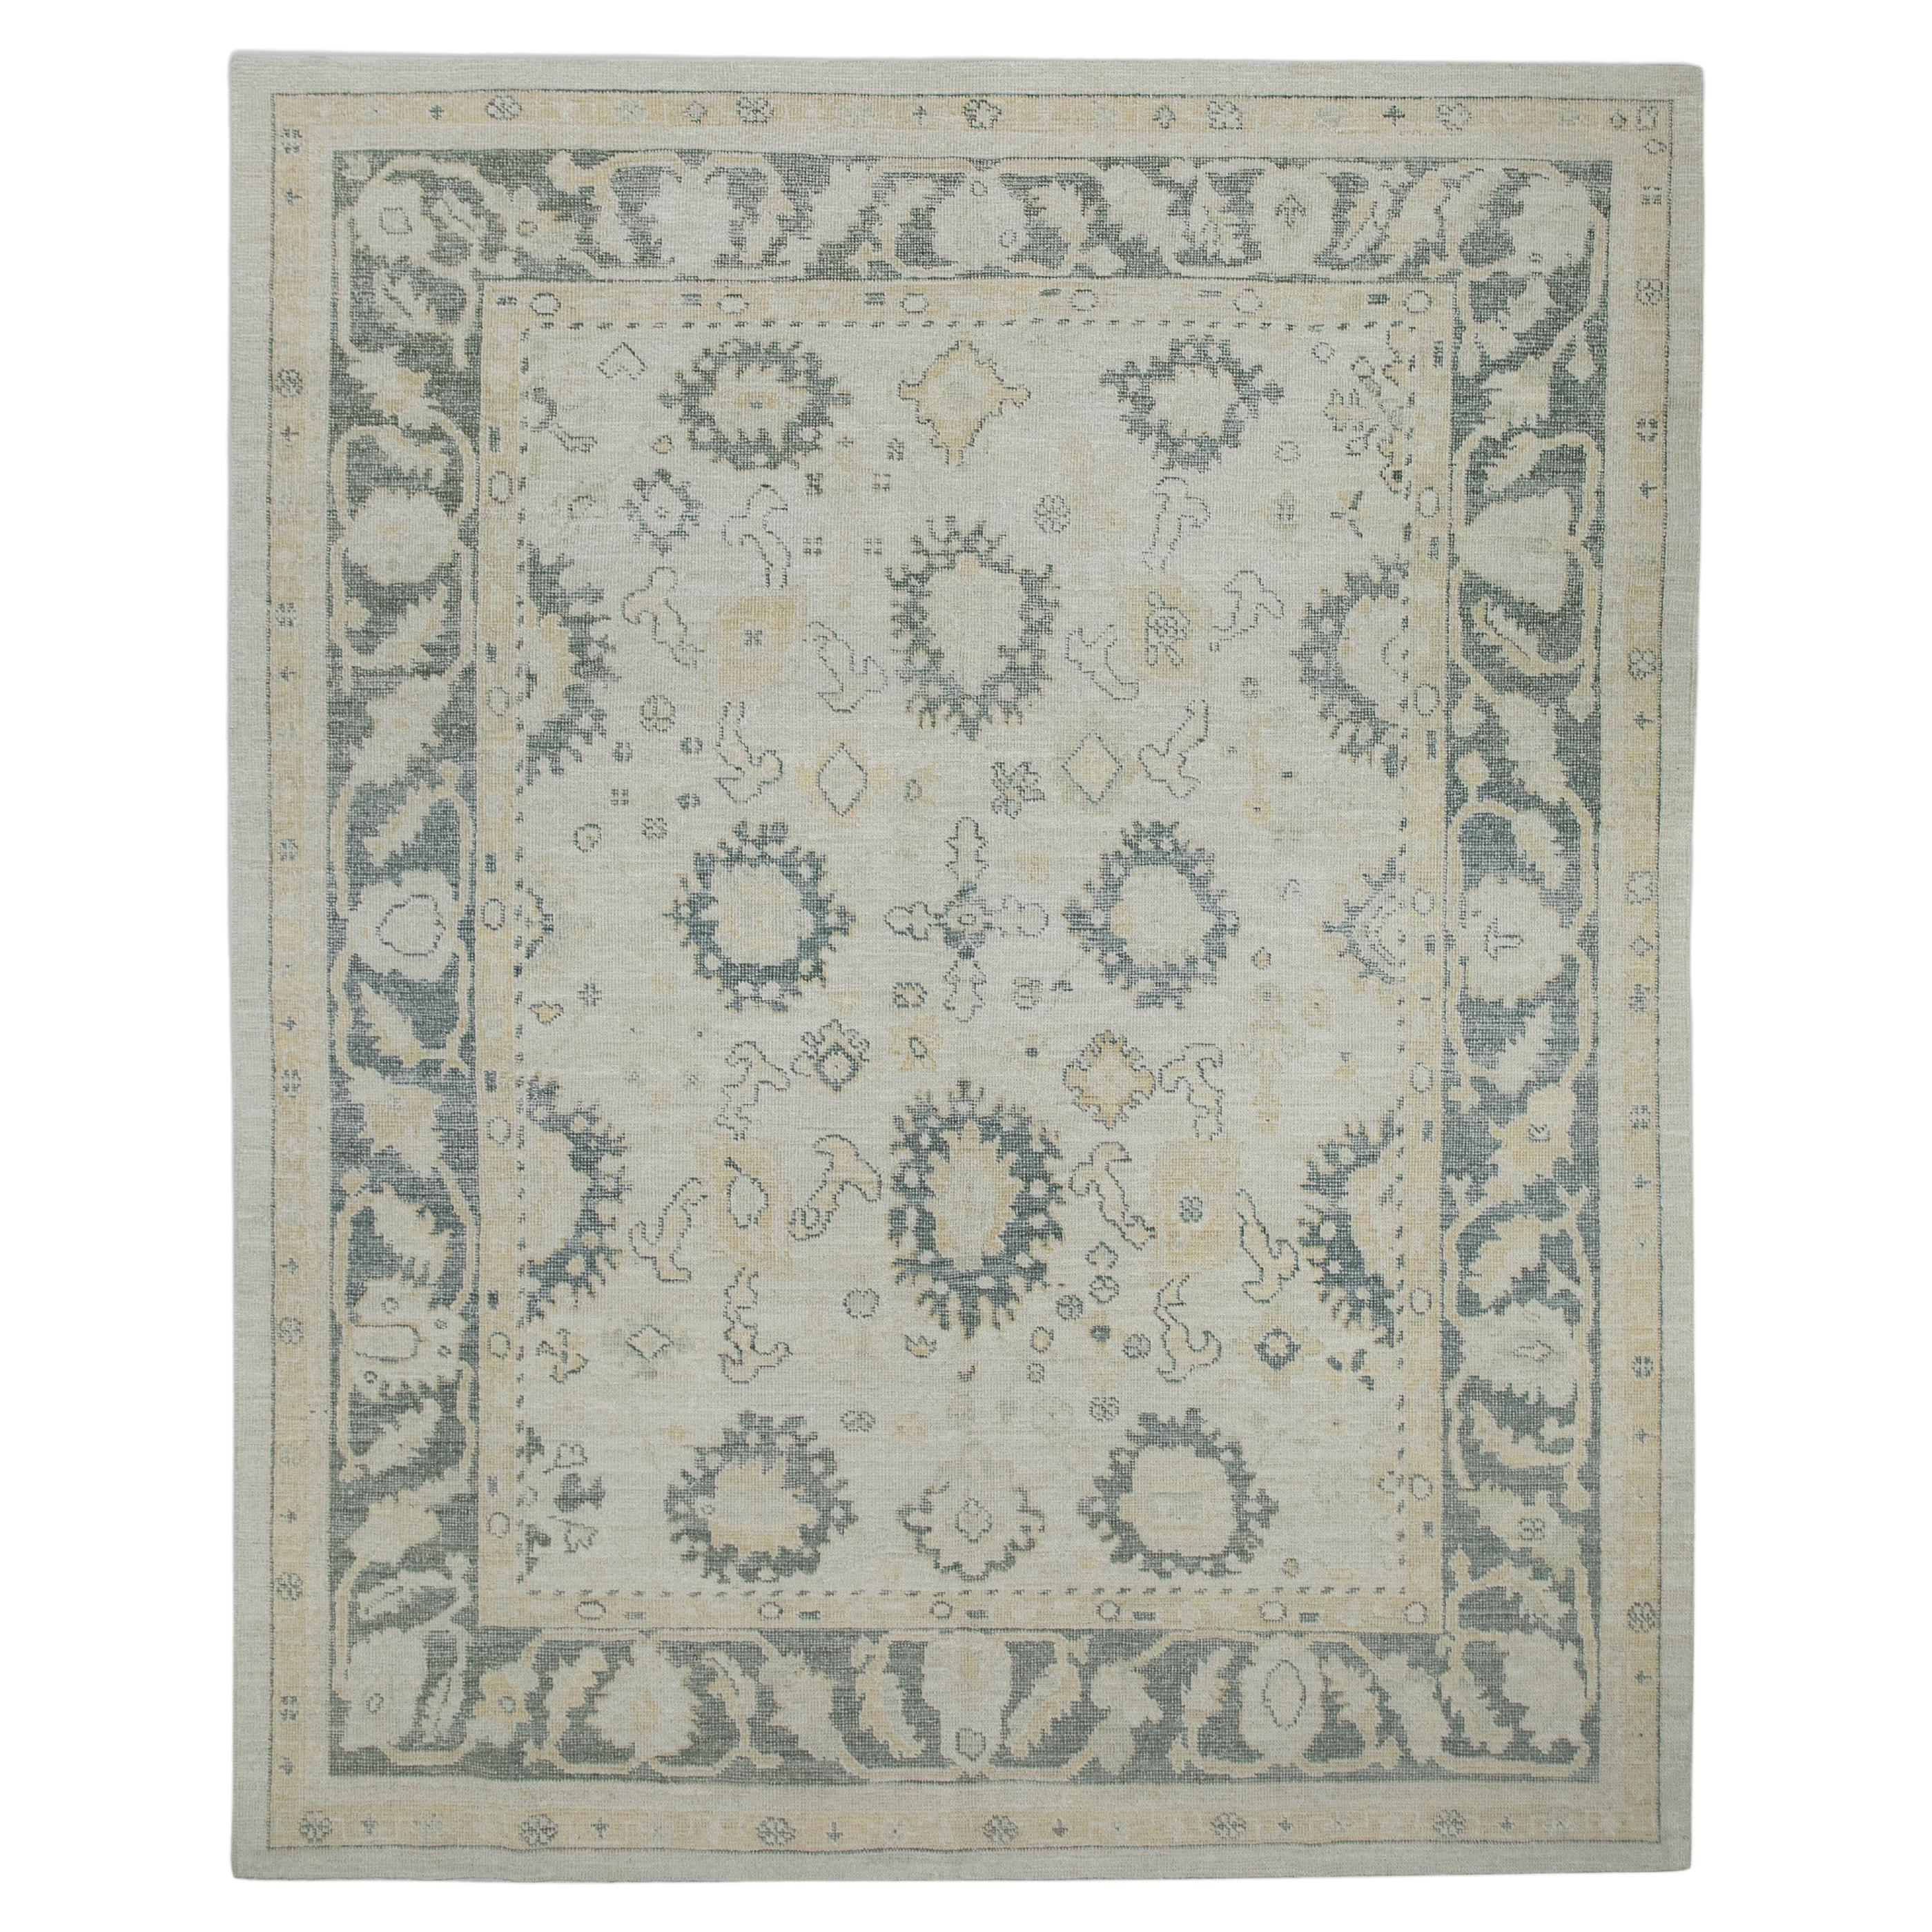 White & Green Floral Design Handwoven Wool Turkish Oushak Rug 7'9" x 9'7" For Sale